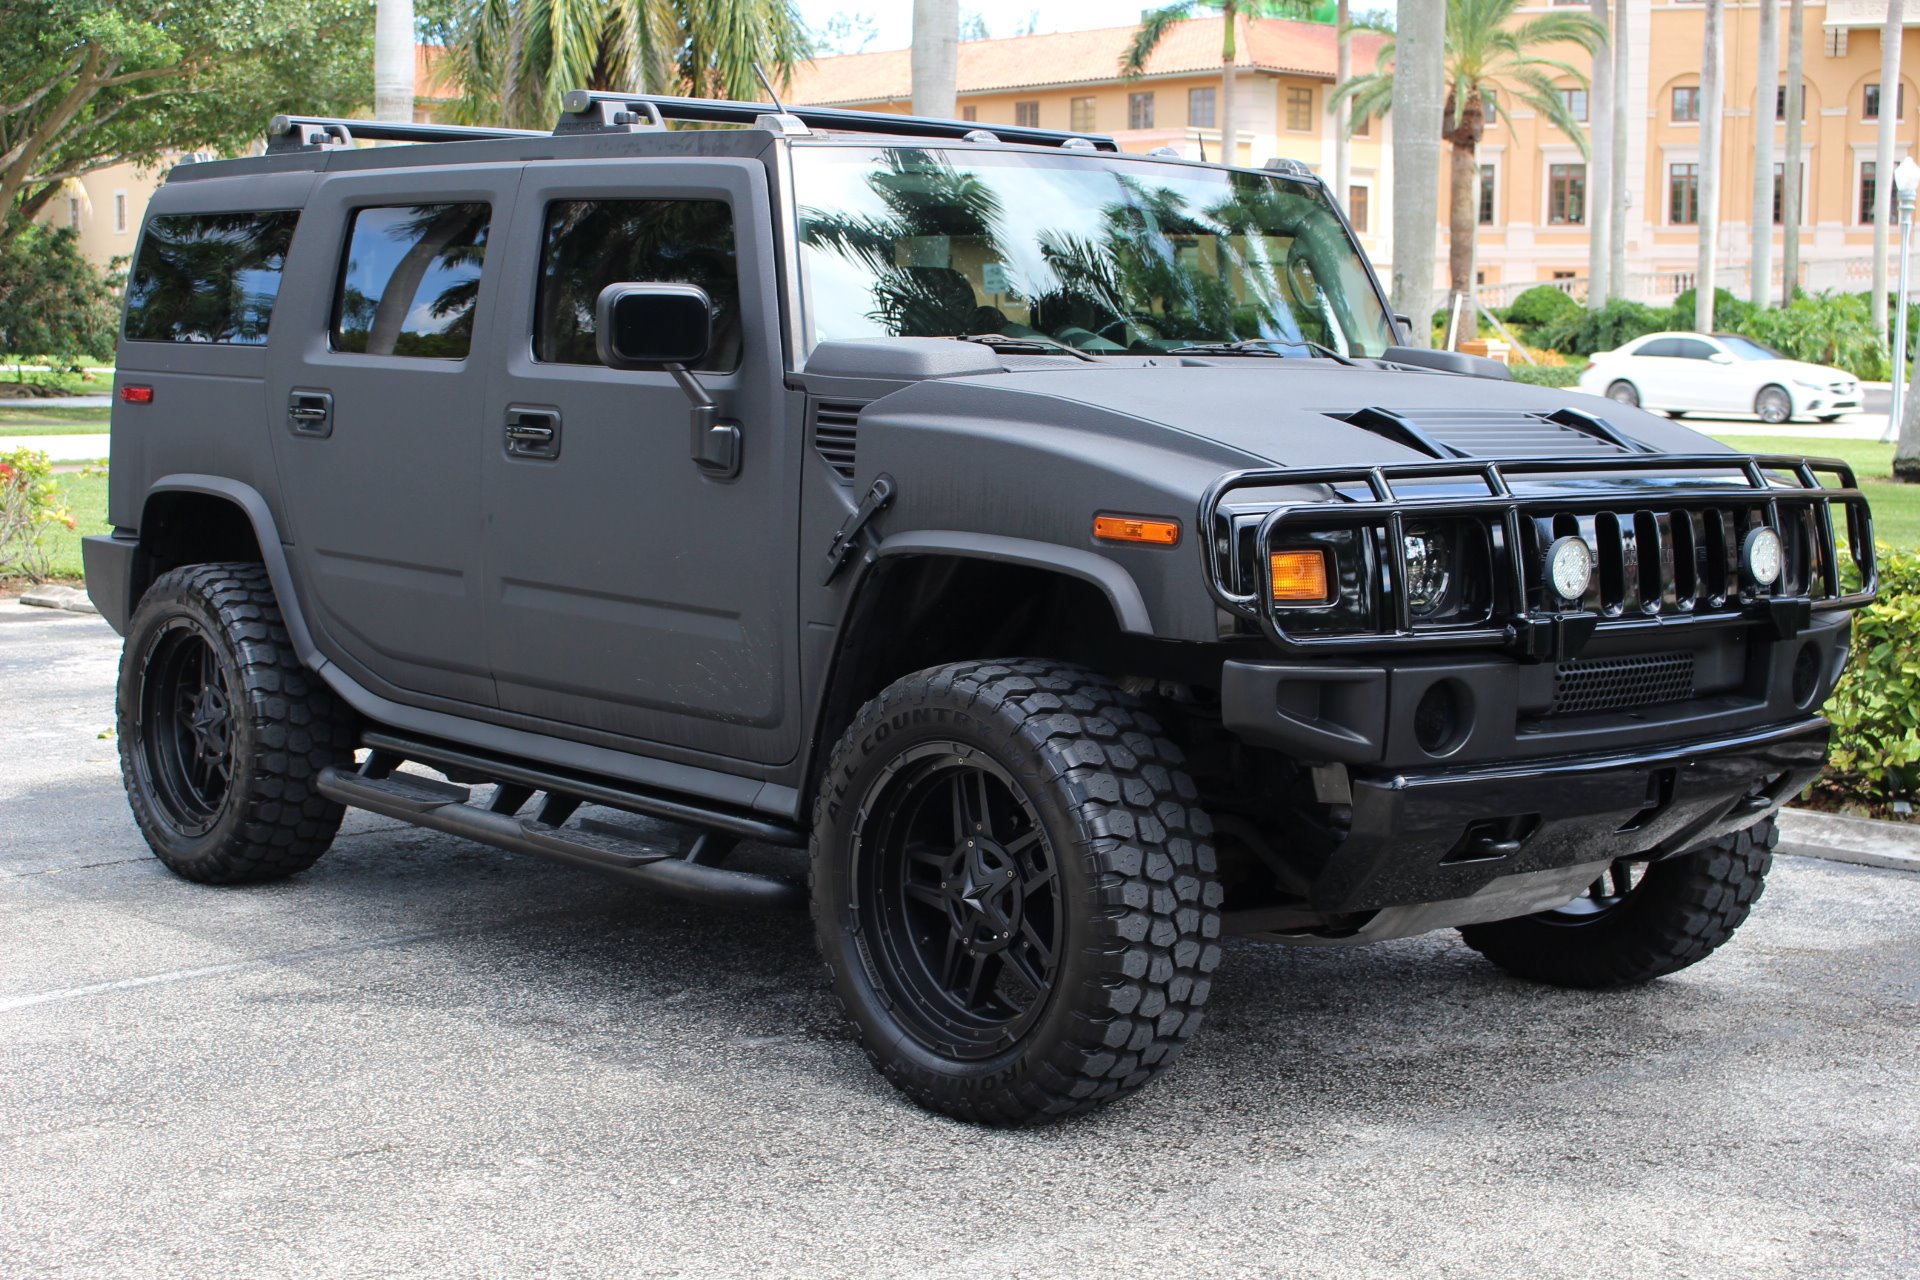 Used 2003 HUMMER H2 Lux Series For Sale ($28,850) | The Gables Sports ...